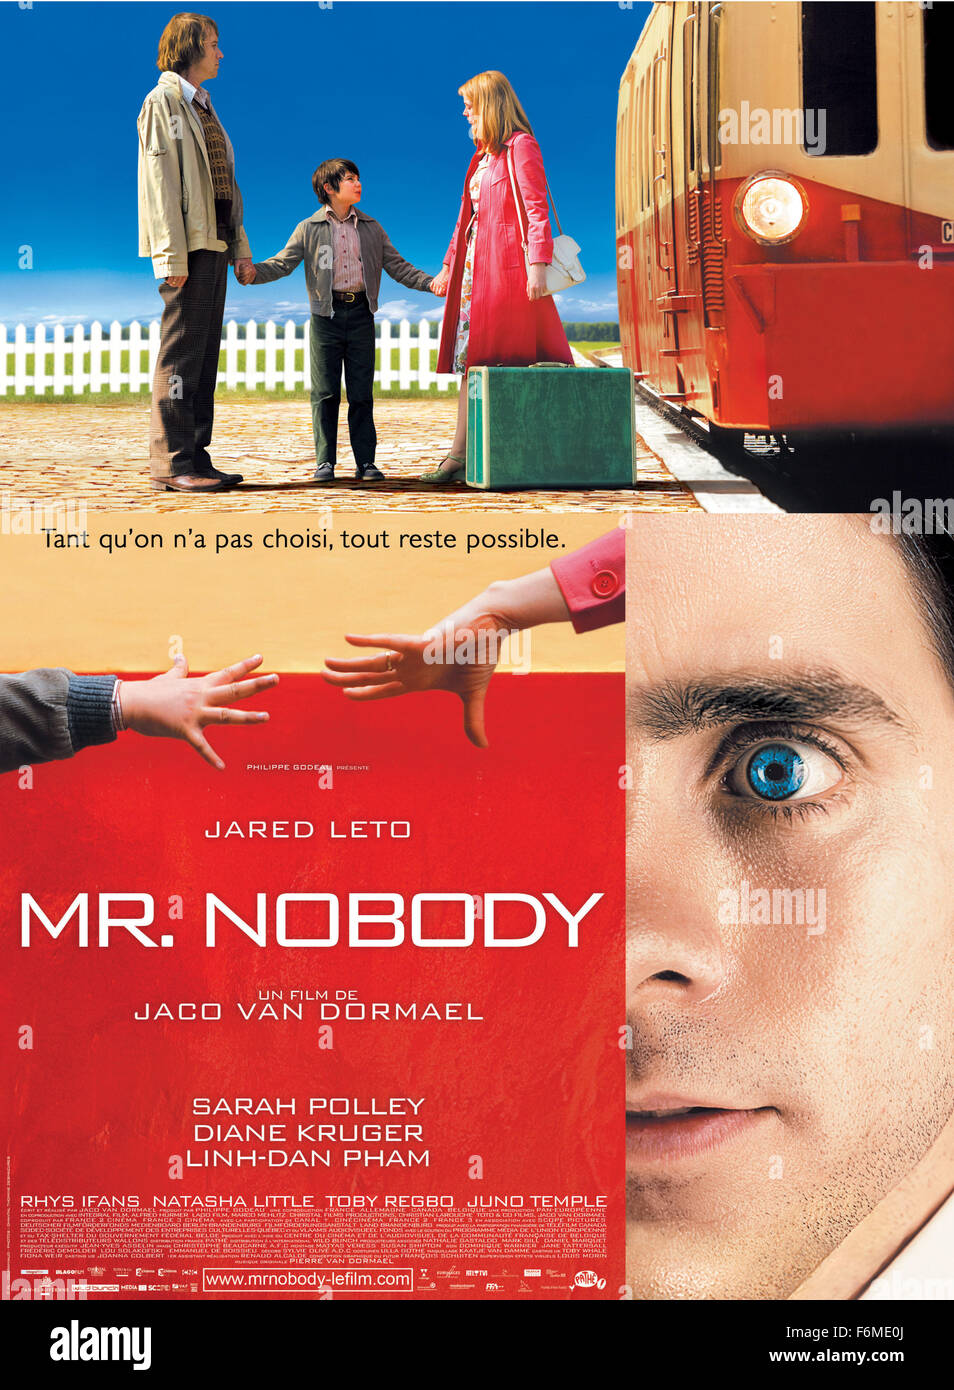 RELEASE DATE: September 18, 2009. MOVIE TITLE: Mr. Nobody. STUDIO: Pan EuropZenne. PLOT: Nemo Nobody leads an ordinary existence at his wife's side, Elise, and their 3 children until the day when reality skids and he wakes up as an old man in the year 2092. At 120, Mr. Nobody is both the oldest man in the world and the last mortal of a new mankind where nobody dies anymore. But that doesn't seem to interest or bother him very much. The only questions that preoccupy him in the present is whether he lived the right life for himself, loved the woman whom he was supposed to love, and had the child Stock Photo